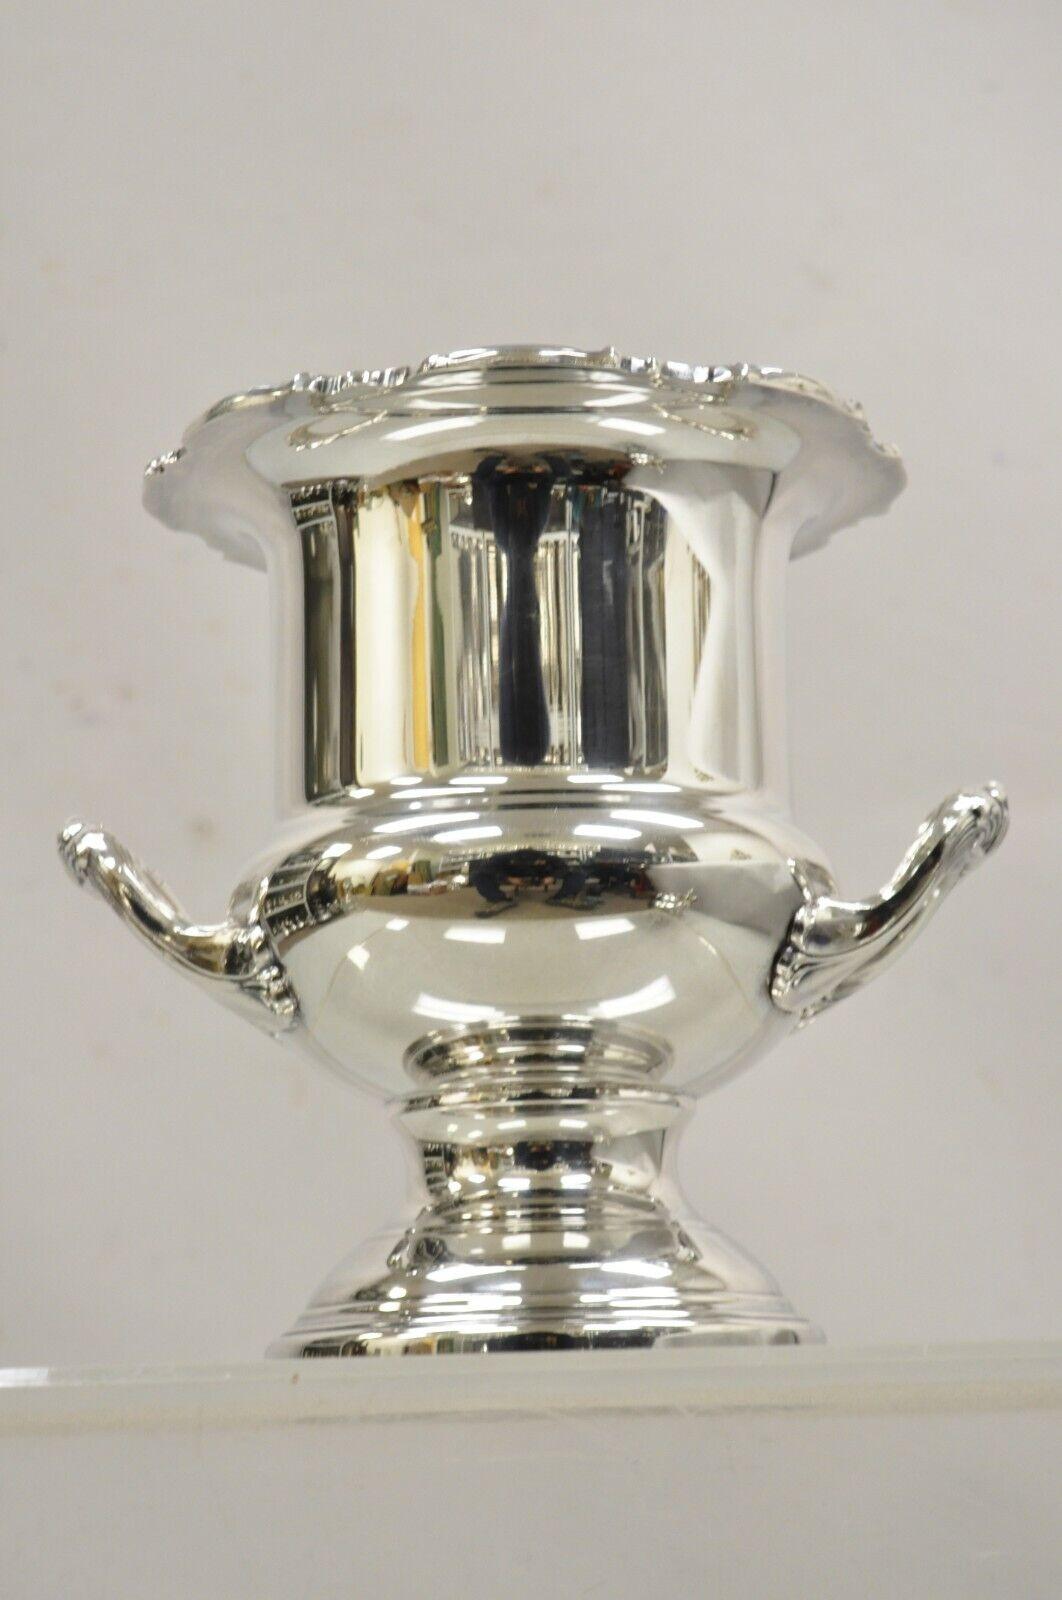 Vintage Victorian Style Silver Plated Trophy Cup Champagne Chiller Ice Bucket. Circa Mid to Late 20th Century. Measurements: 10